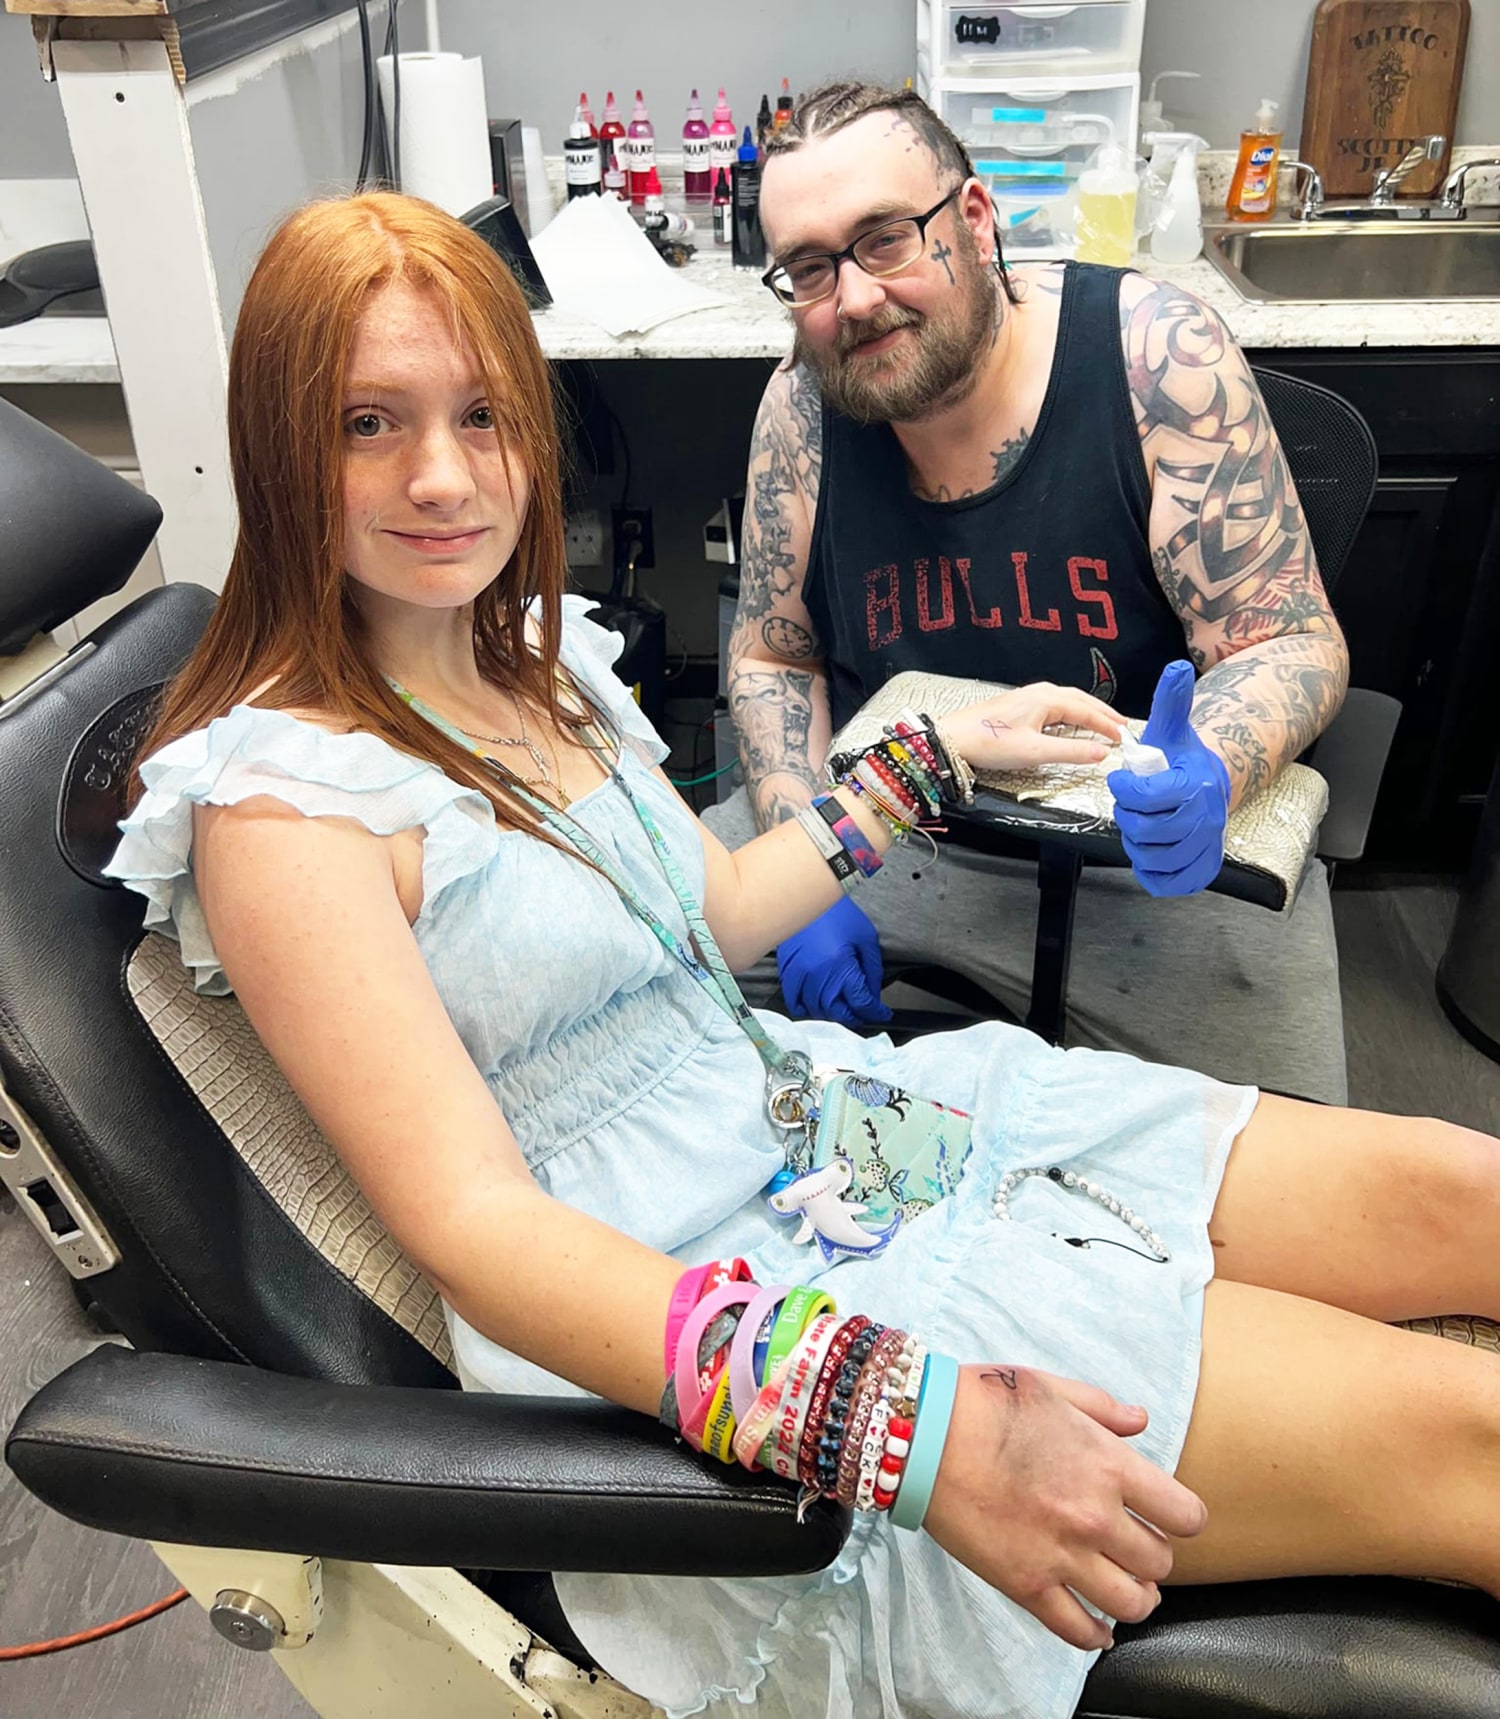 Consumer Voice: Eager to get a tattoo? Think twice